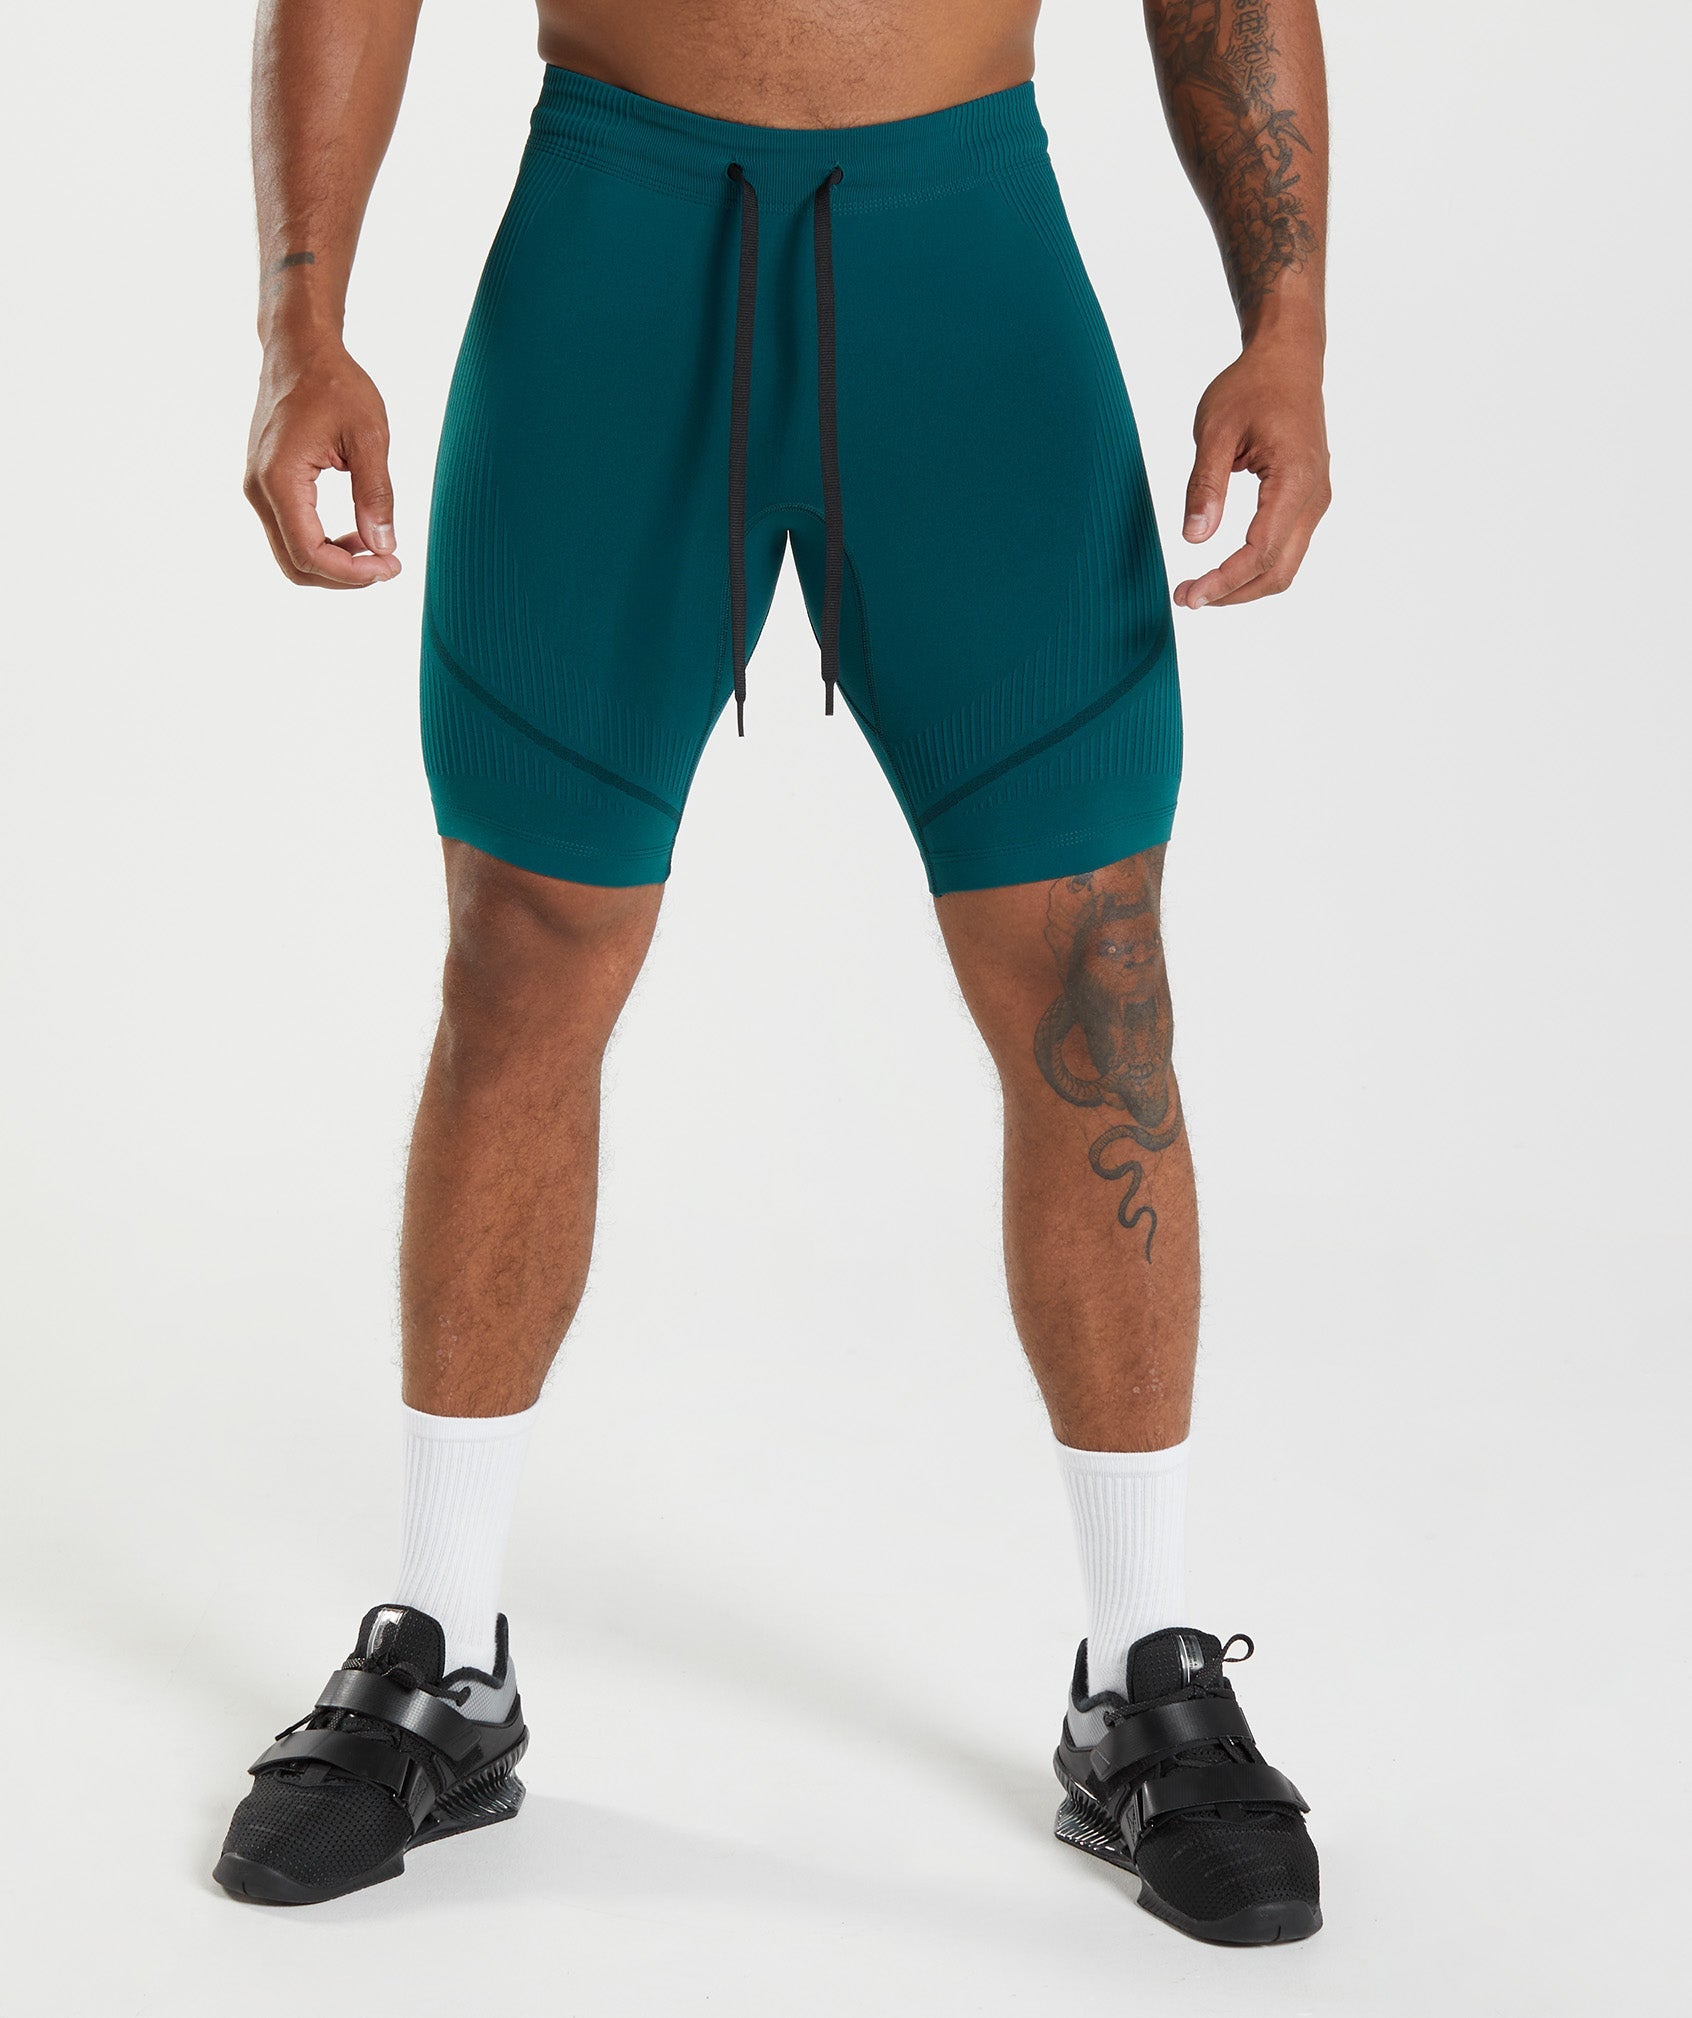 315 Seamless 1/2 Shorts in Winter Teal/Black